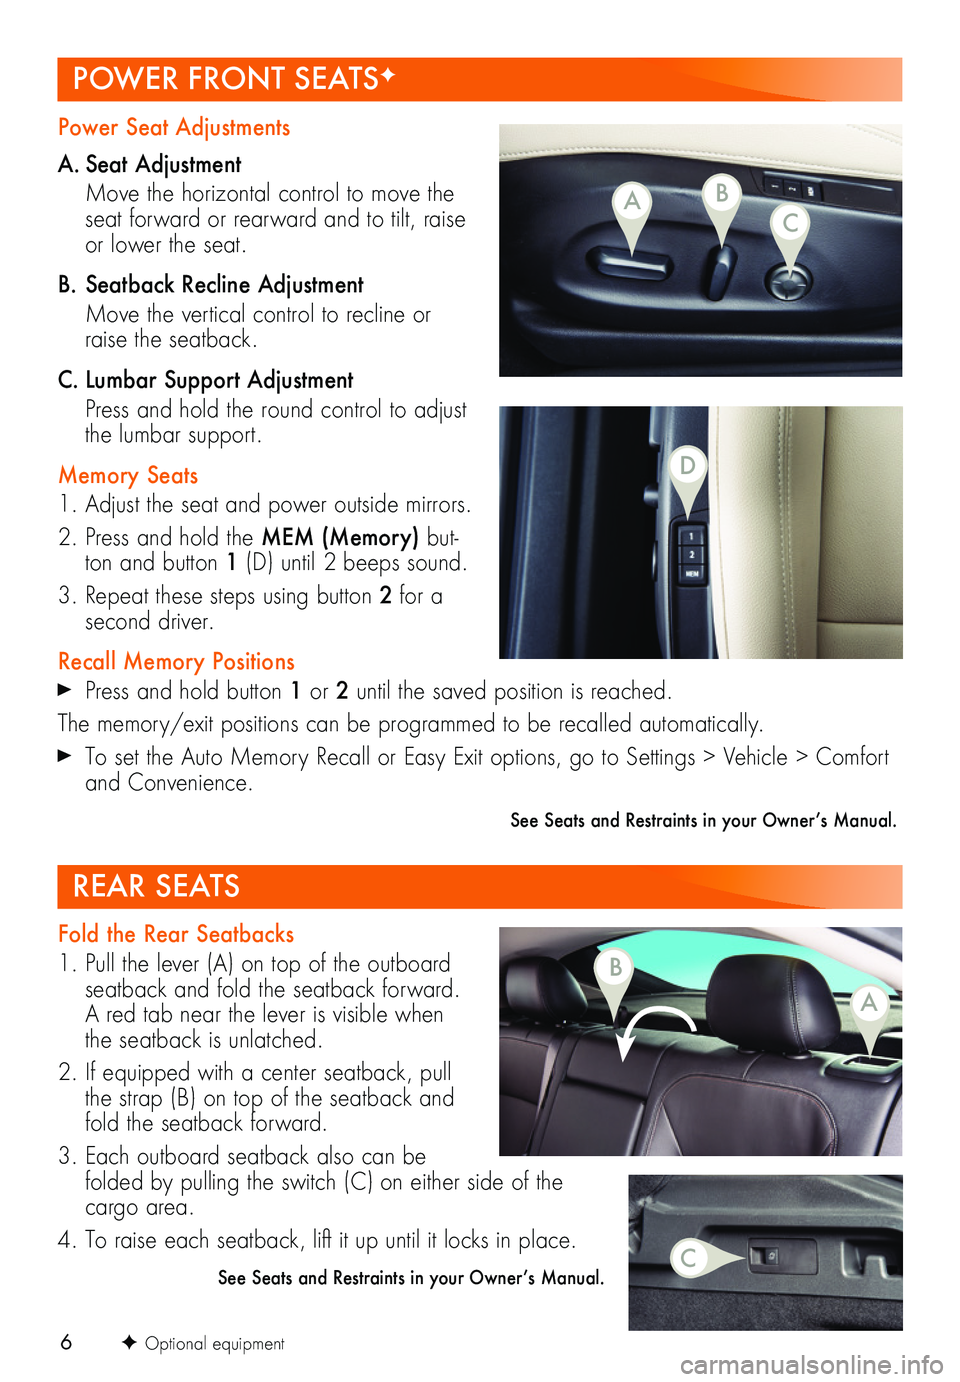 BUICK REGAL SPORTBACK 2018  Get To Know Guide 6
Power Seat Adjustments
A. Seat  Adjustment
 Move the horizontal control to move the seat forward or rearward and to tilt, raise or lower the seat.
B. Seatback Recline Adjustment
 Move the vertical c